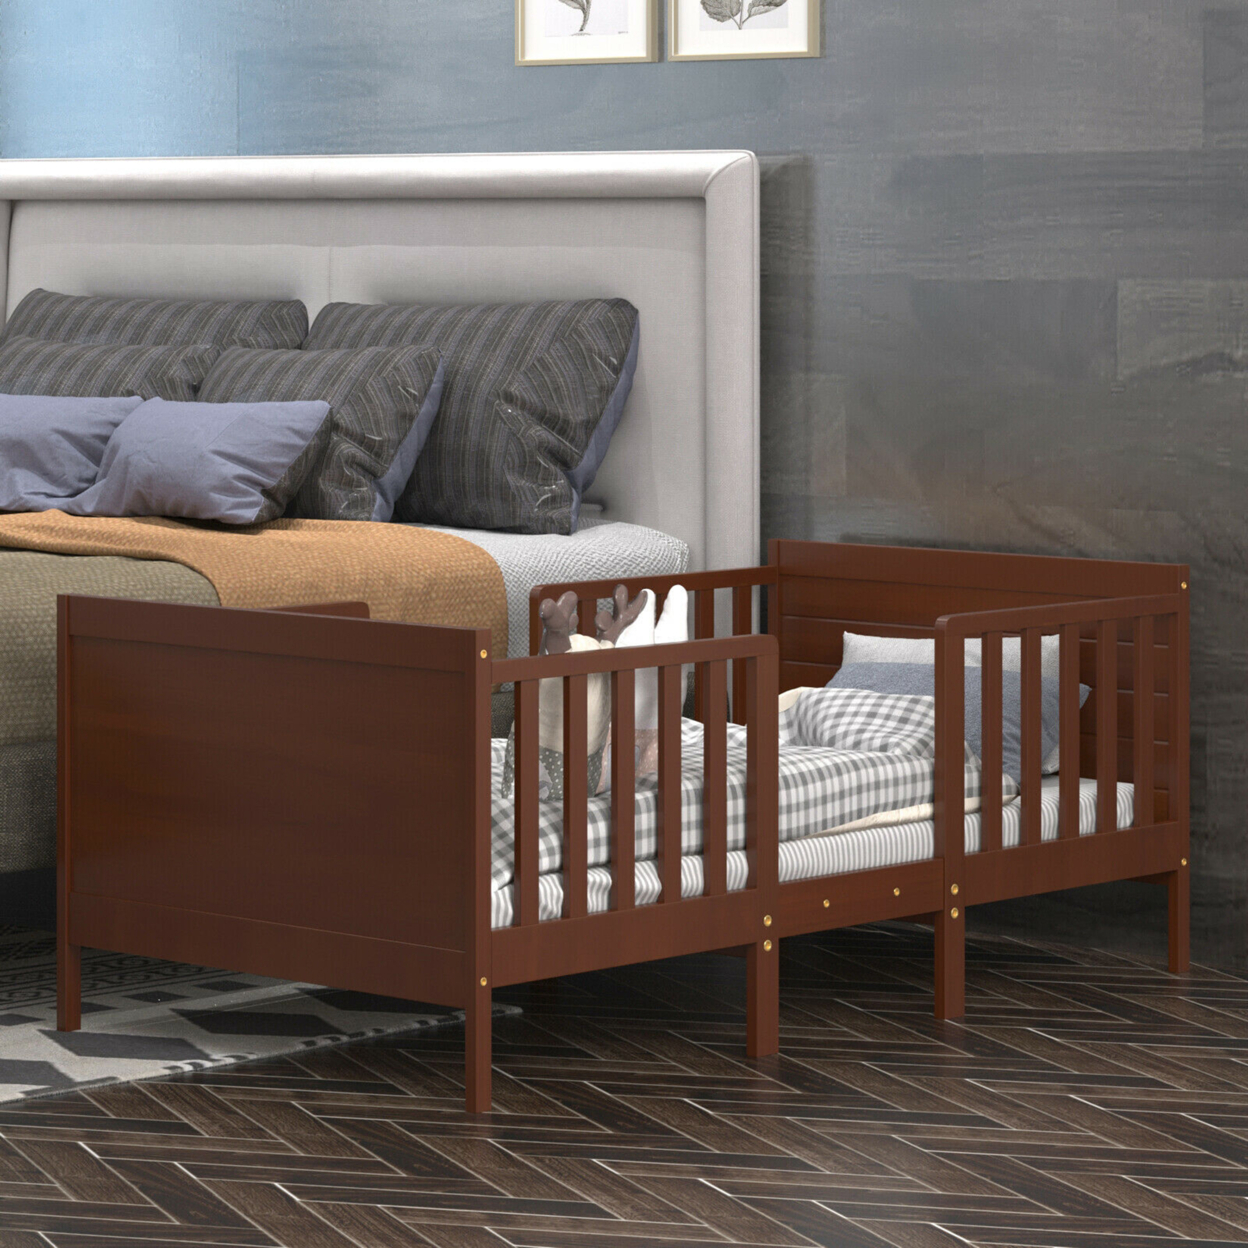 Gymax 2-in-1 Convertible Toddler Bed Kids Wooden Bedroom Furniture W/ Guardrails - Brown